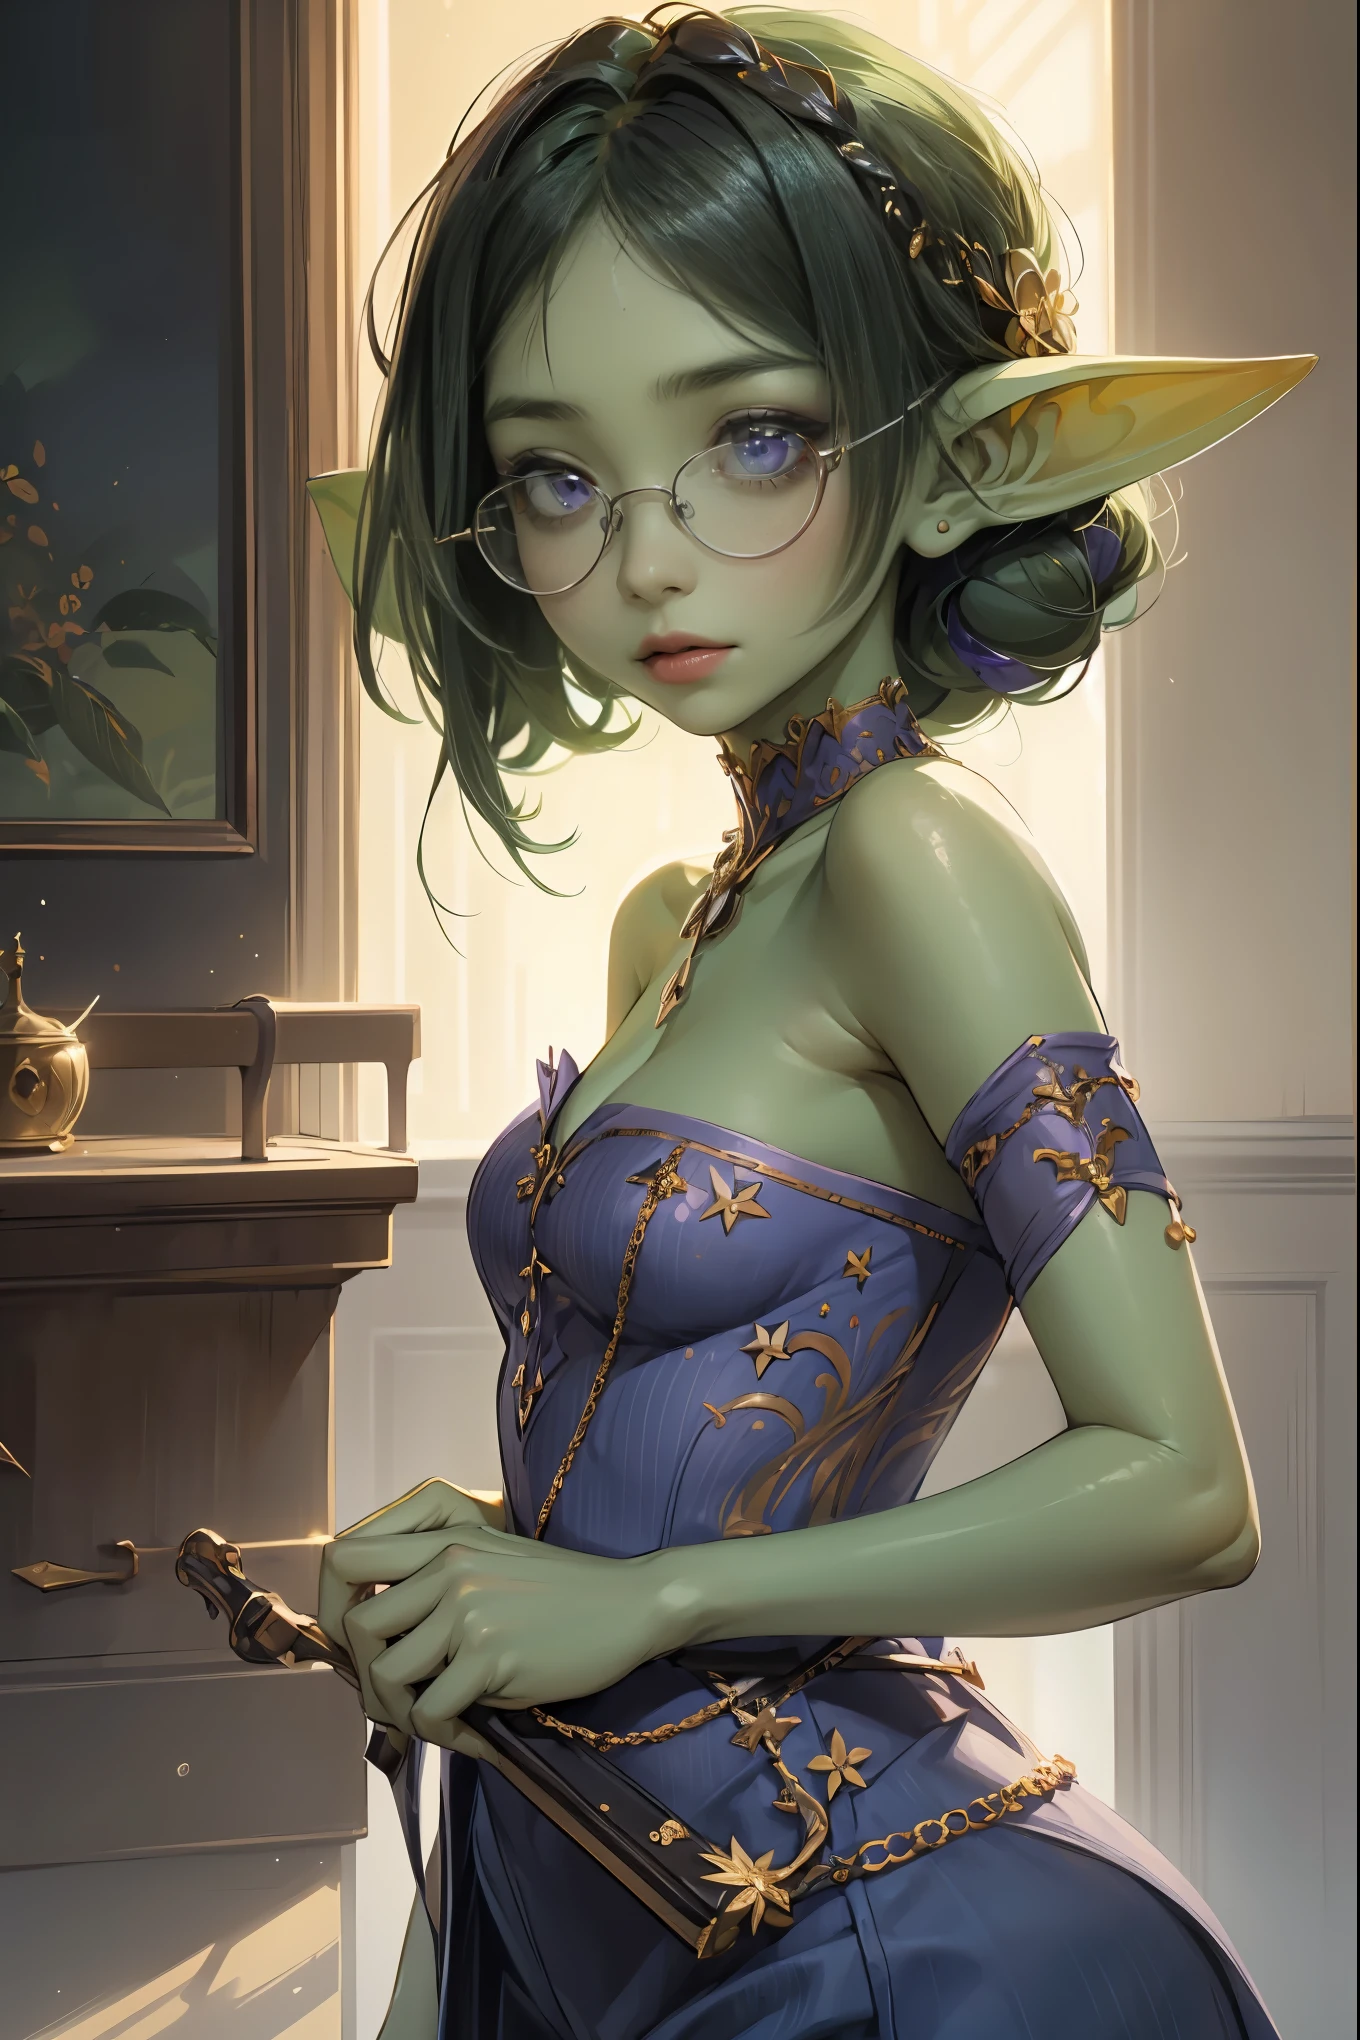 (((1girl:1.8))) (((solo))) intricate details, tonemapping, sharp focus, hyper detailed, trending on Artstation, Masterpiece, absurdrez, amazing detail, 4k, perfect face, symmetrical, (small ears), 3 foot tall green goblin girl, wearing purple shirt and tight jeans, very shy, (((black glasses))), ((green skin)), short dark green hair, (purple eyes), exploring a fine art museum, admiring painting on the wall, curious and fascinated, cinematic lighting, fine art lines the walls, in art museum, small smile, loves art, walking towards camera, holding purse, stopping to admire art, looking closely at art, white walls, marble floors, fine art, meek, demure